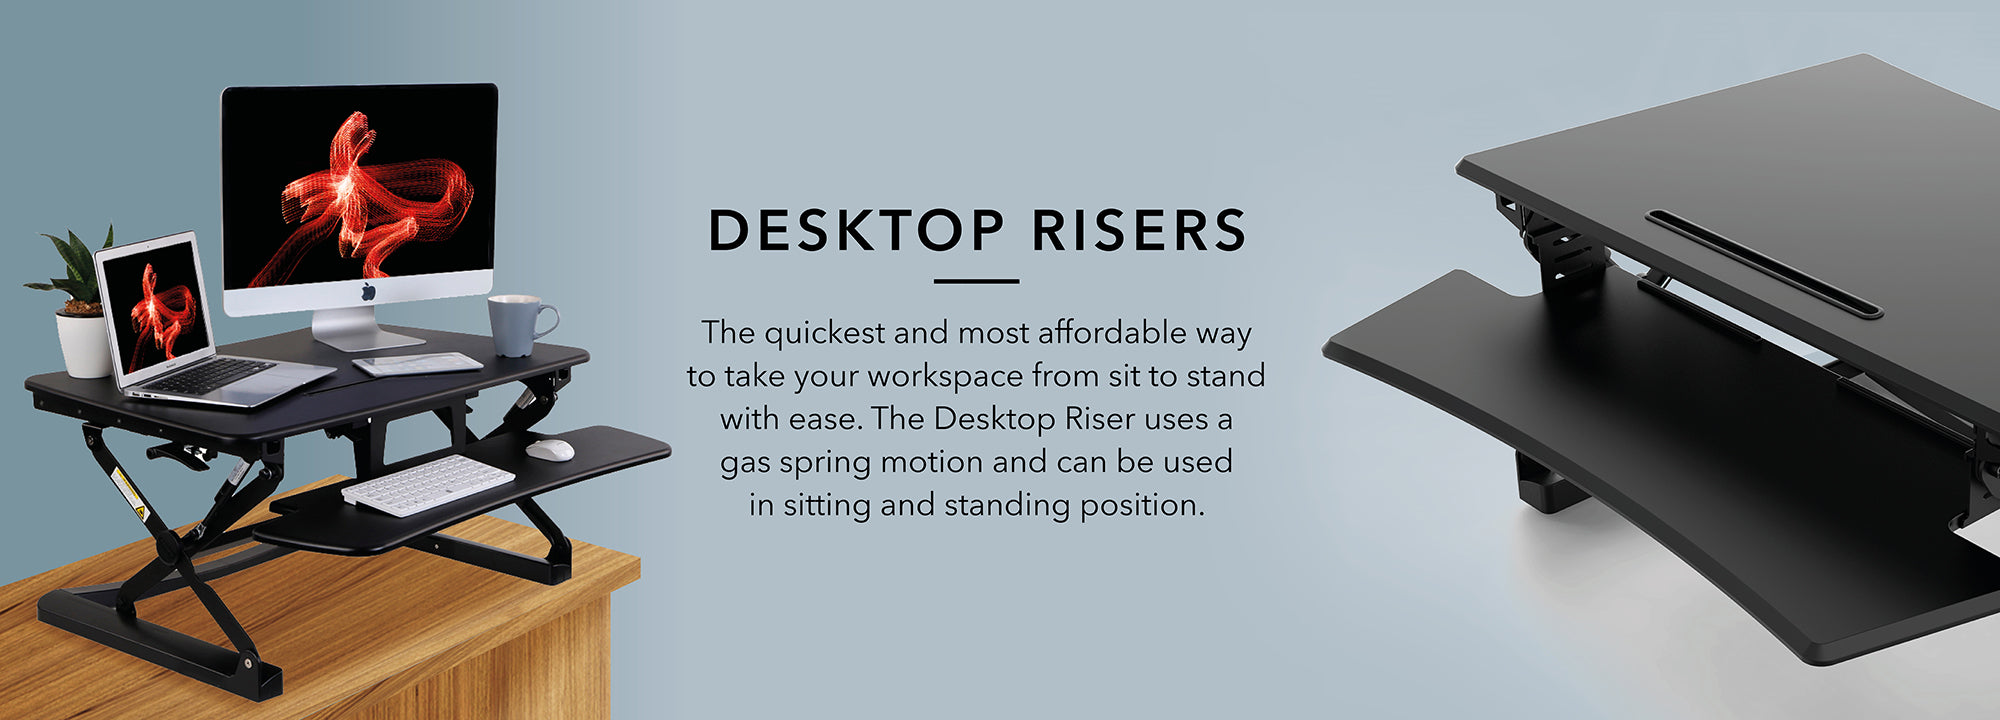 The quickest and most affordable way to take your workspace from sit to stand with ease.